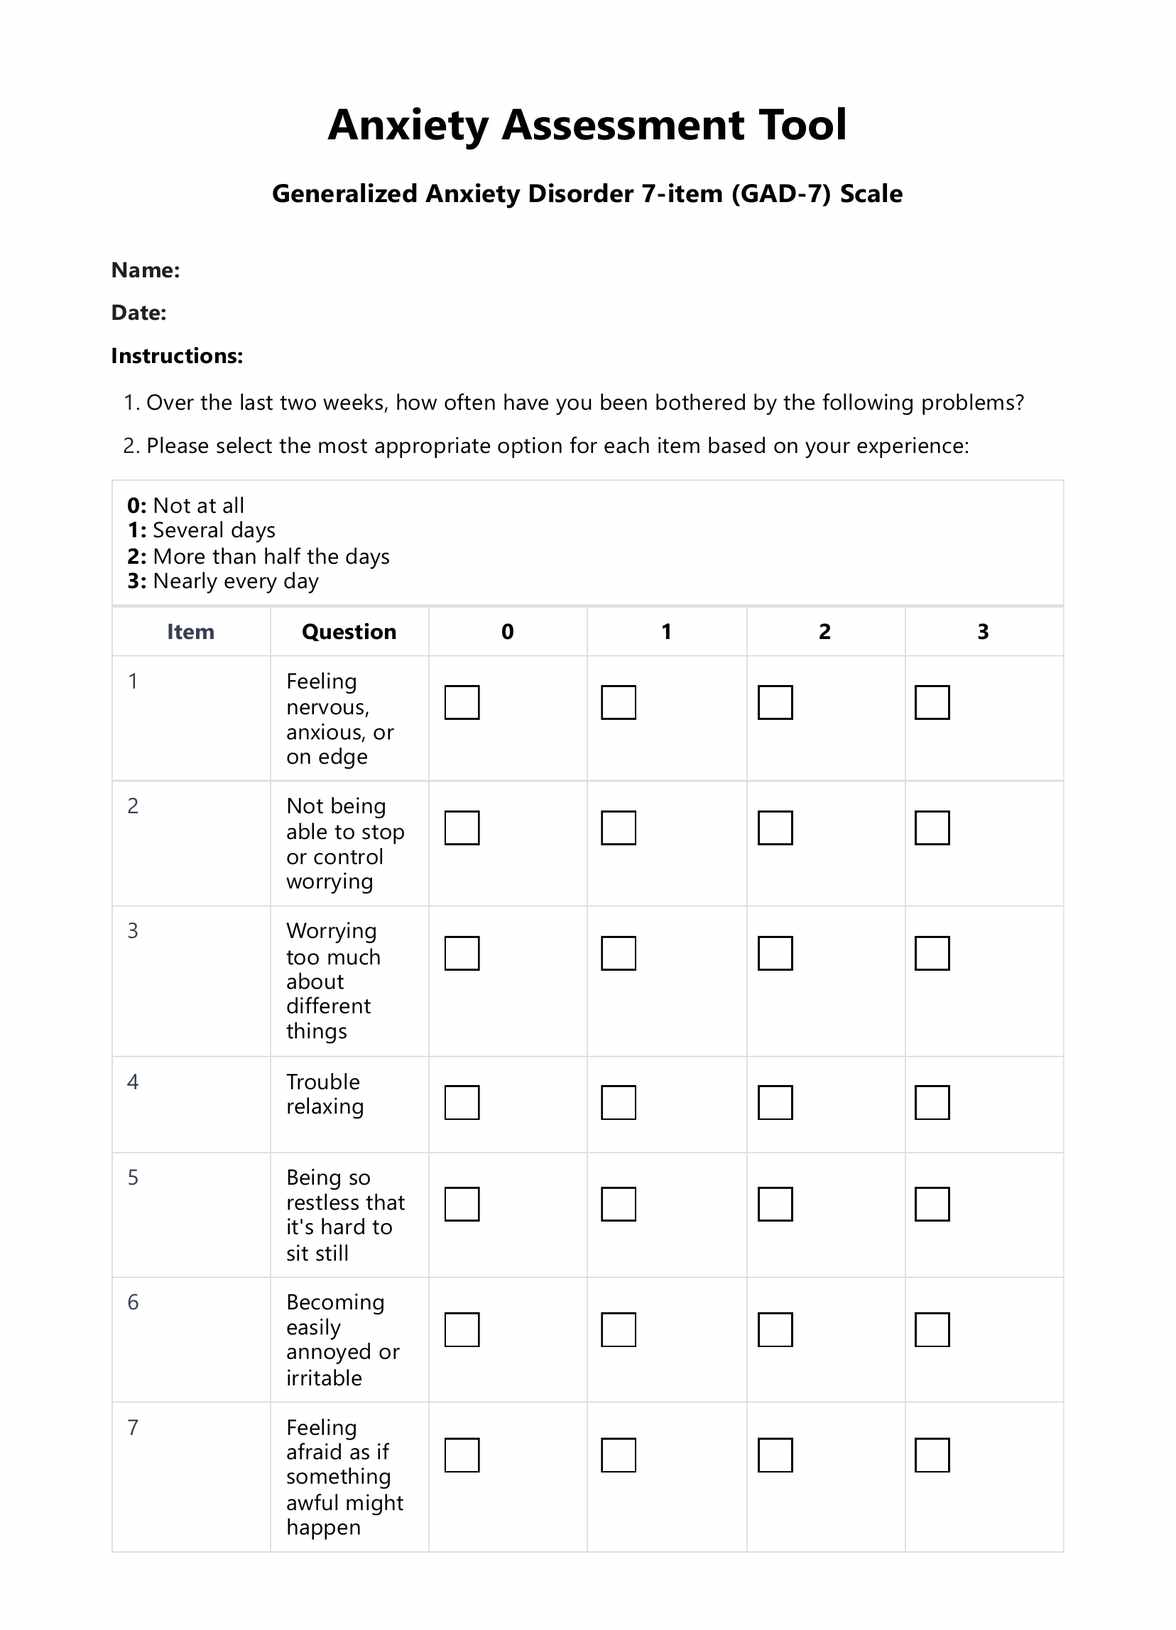 Anxiety Assessment Tool PDF Example